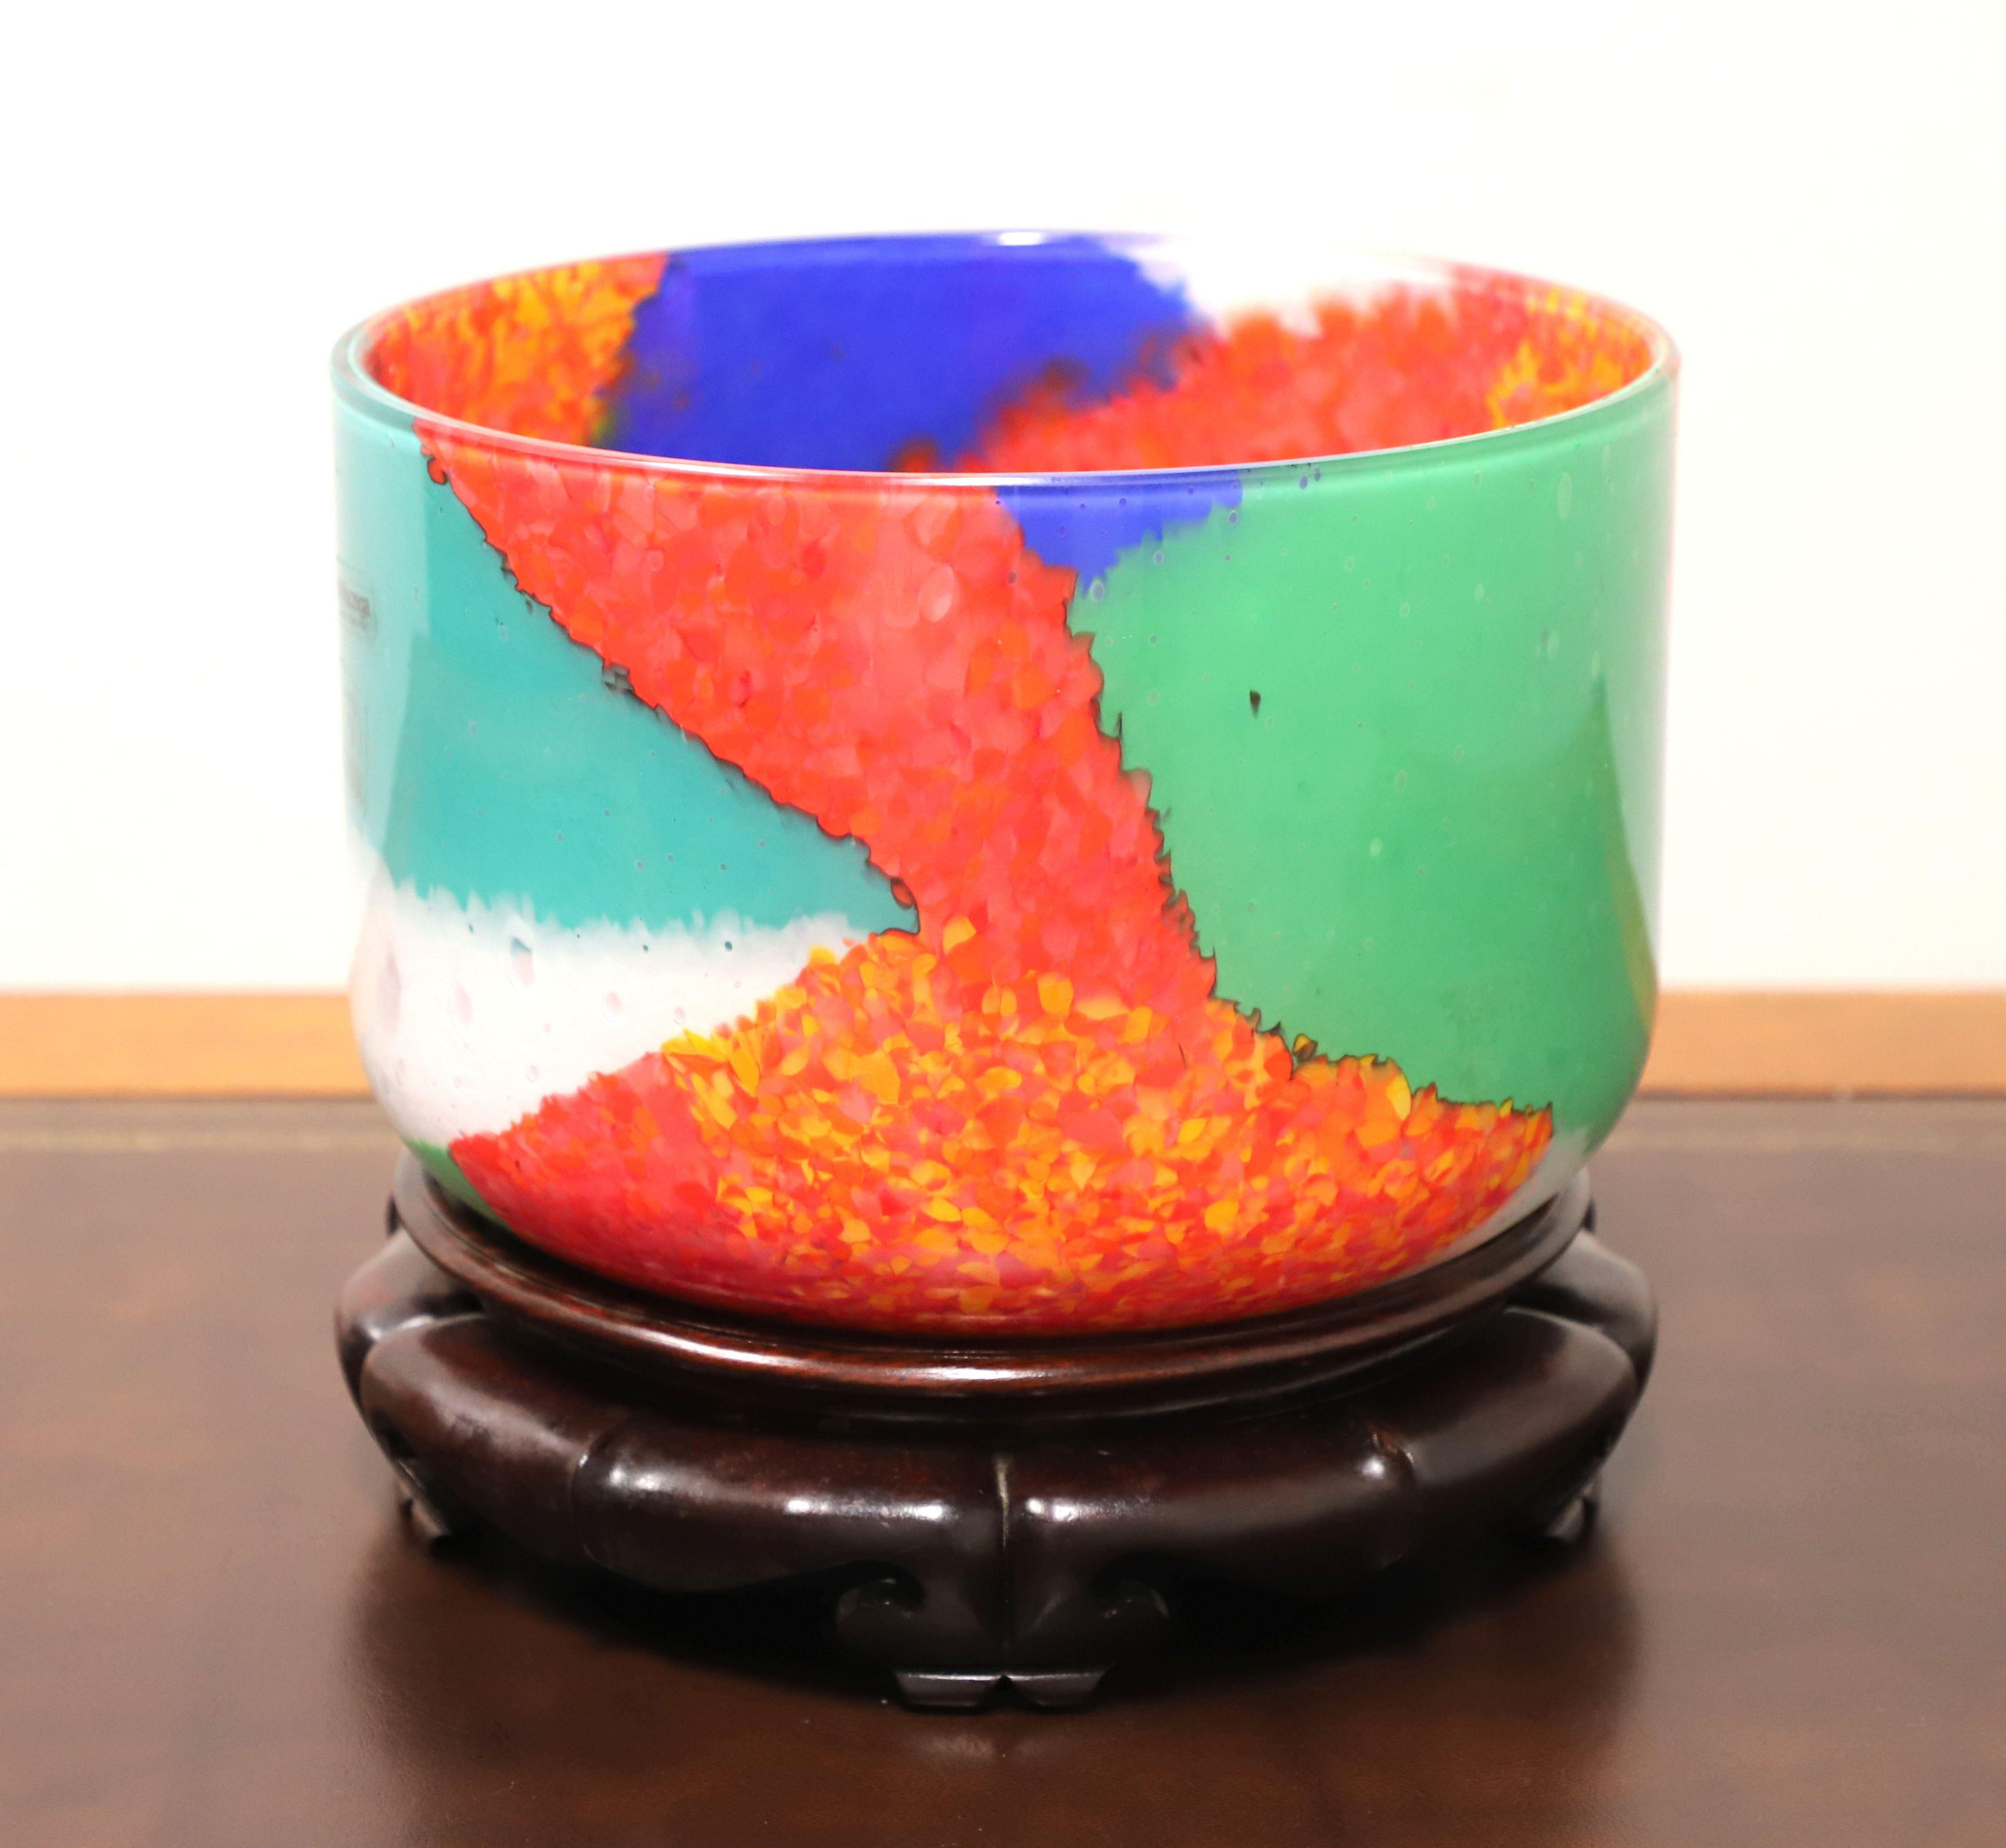 A Late 20th Century decorative Murano glass centerpiece bowl with stand by AV Mazzega. A beautiful multi-color Murano blown glass round bowl with a distinctive swirl texture to the colors, a smooth finish, and a separate decoratively carved round